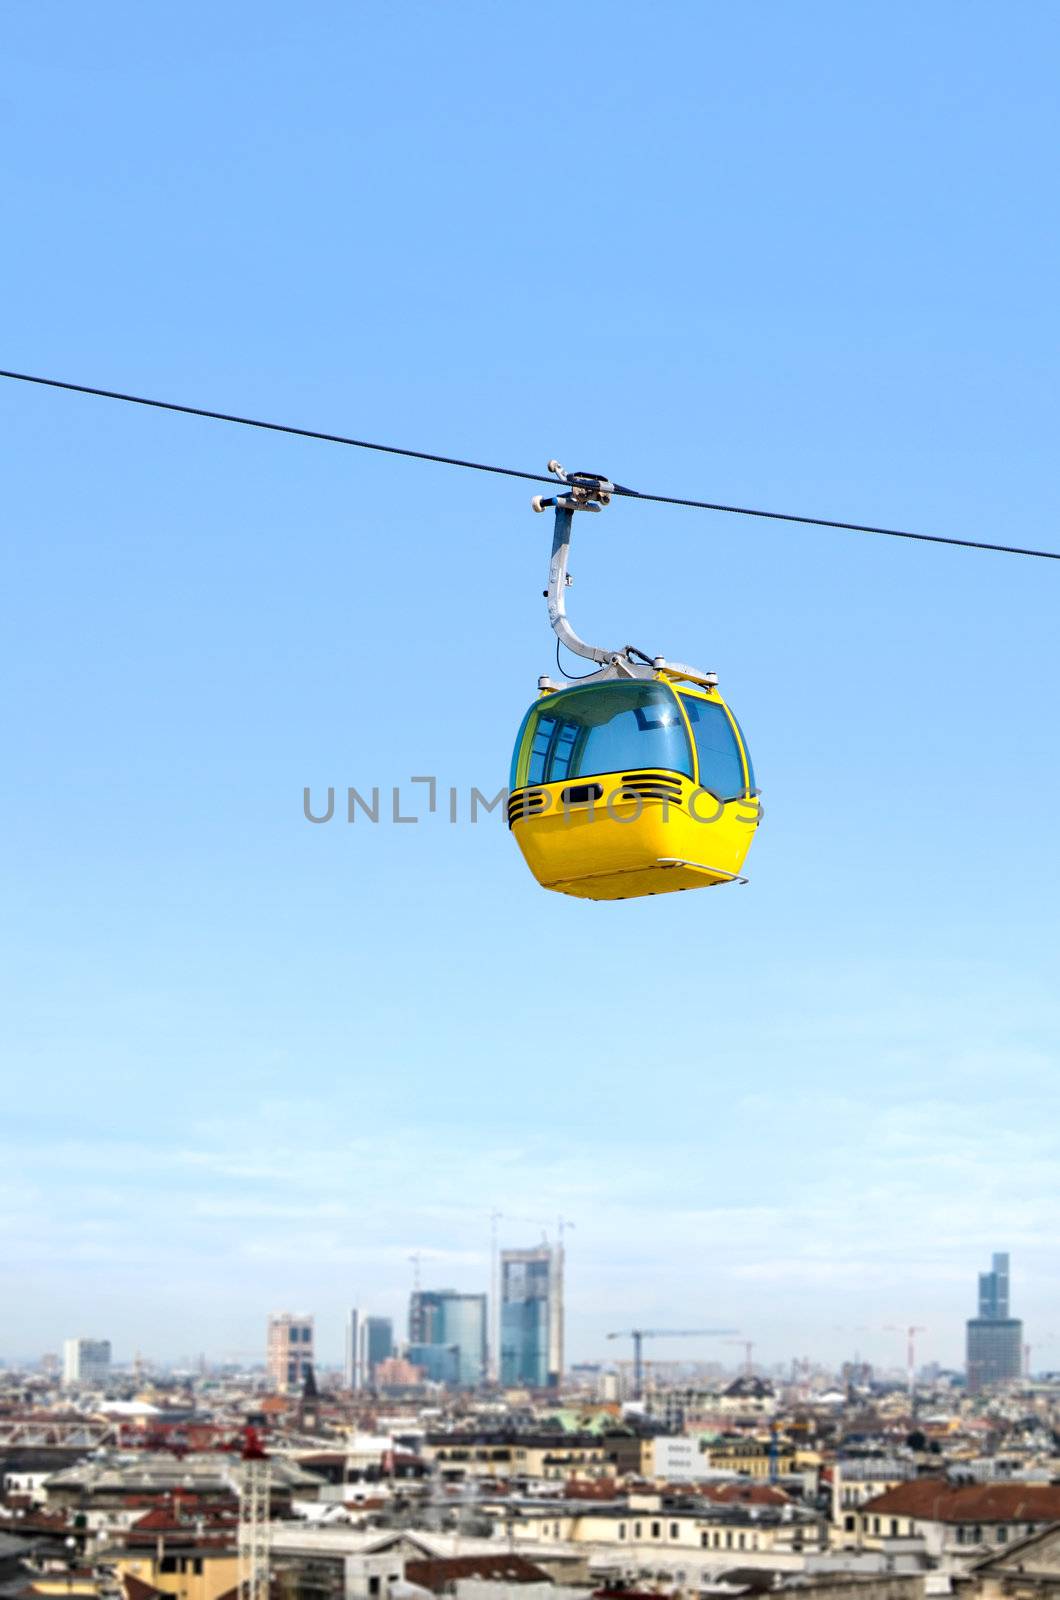 Mode of transport above the city